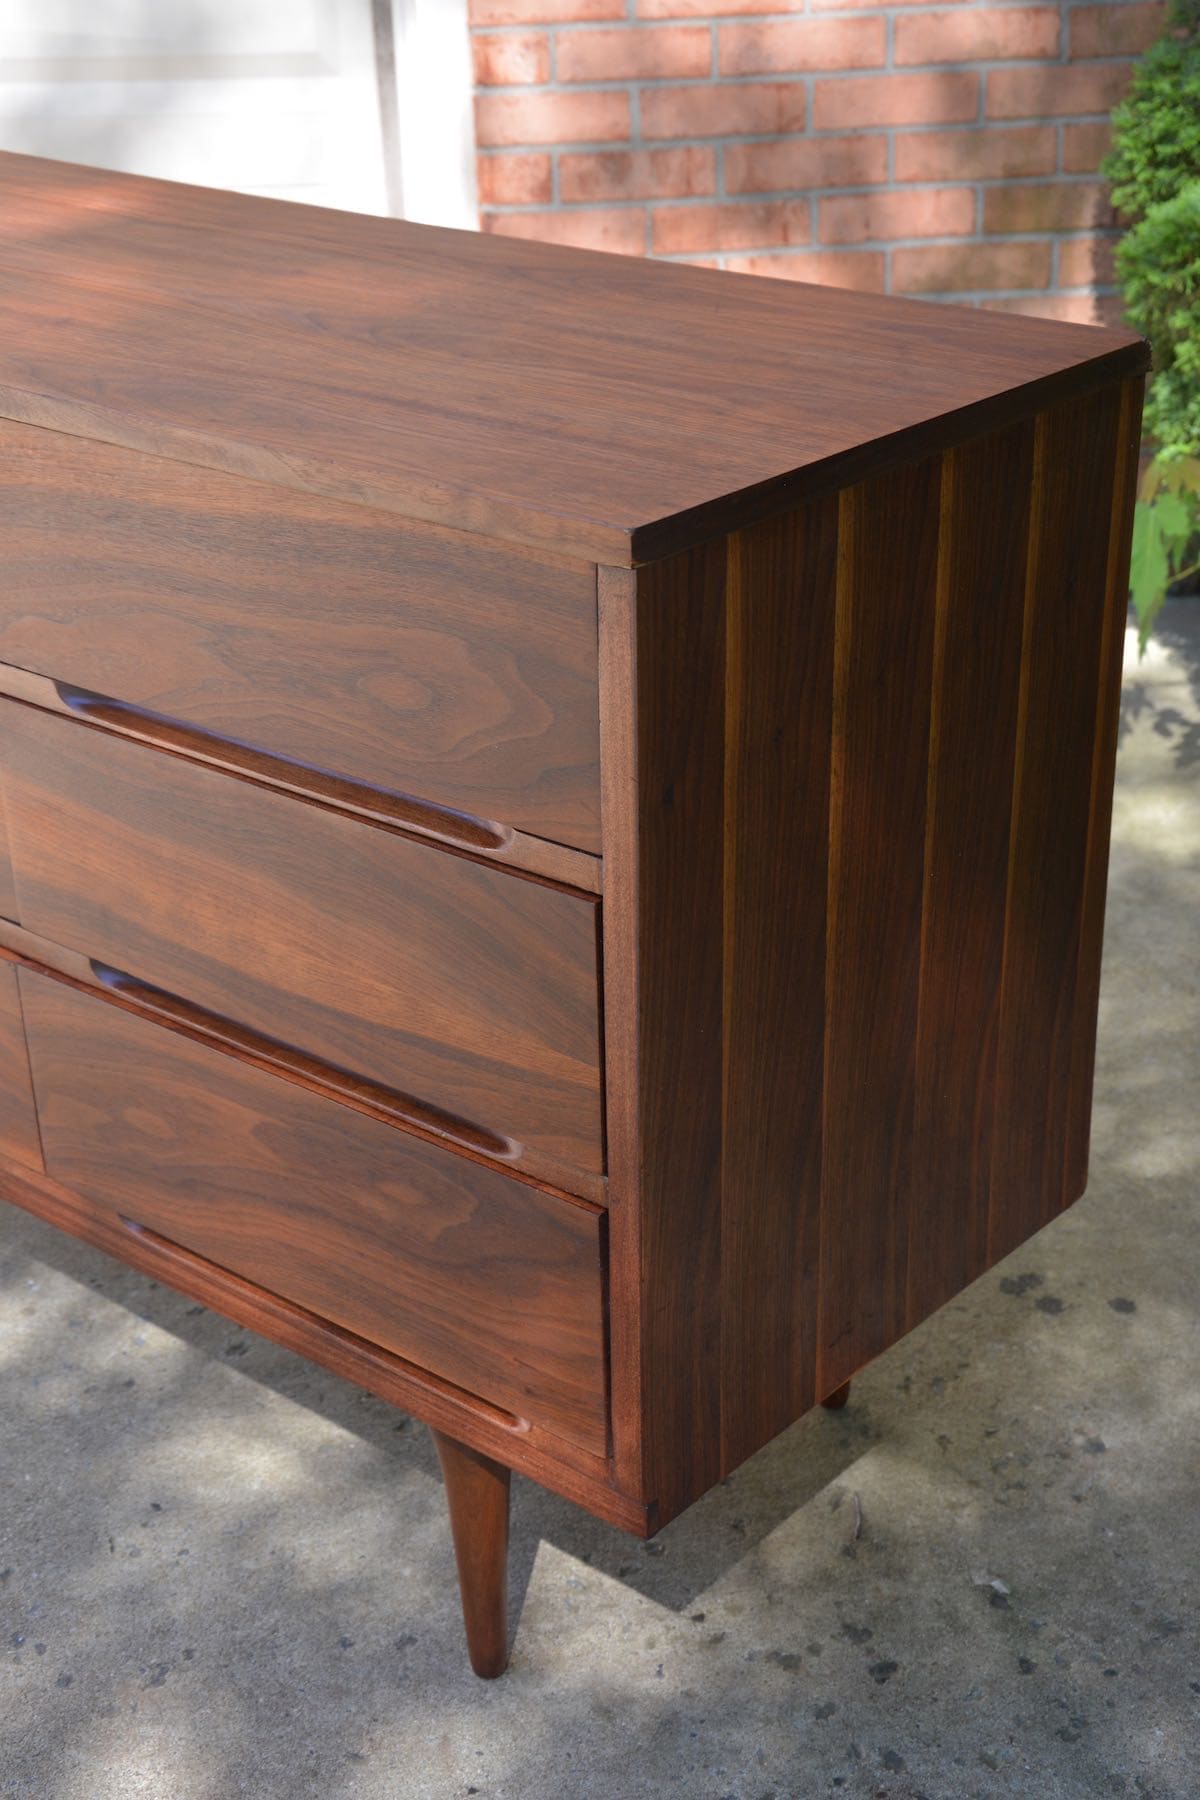 Mid-Century Modern Dresser Makeover Stripped and Refinished - Gorgeous walnut wood dresser. - Thrift Diving